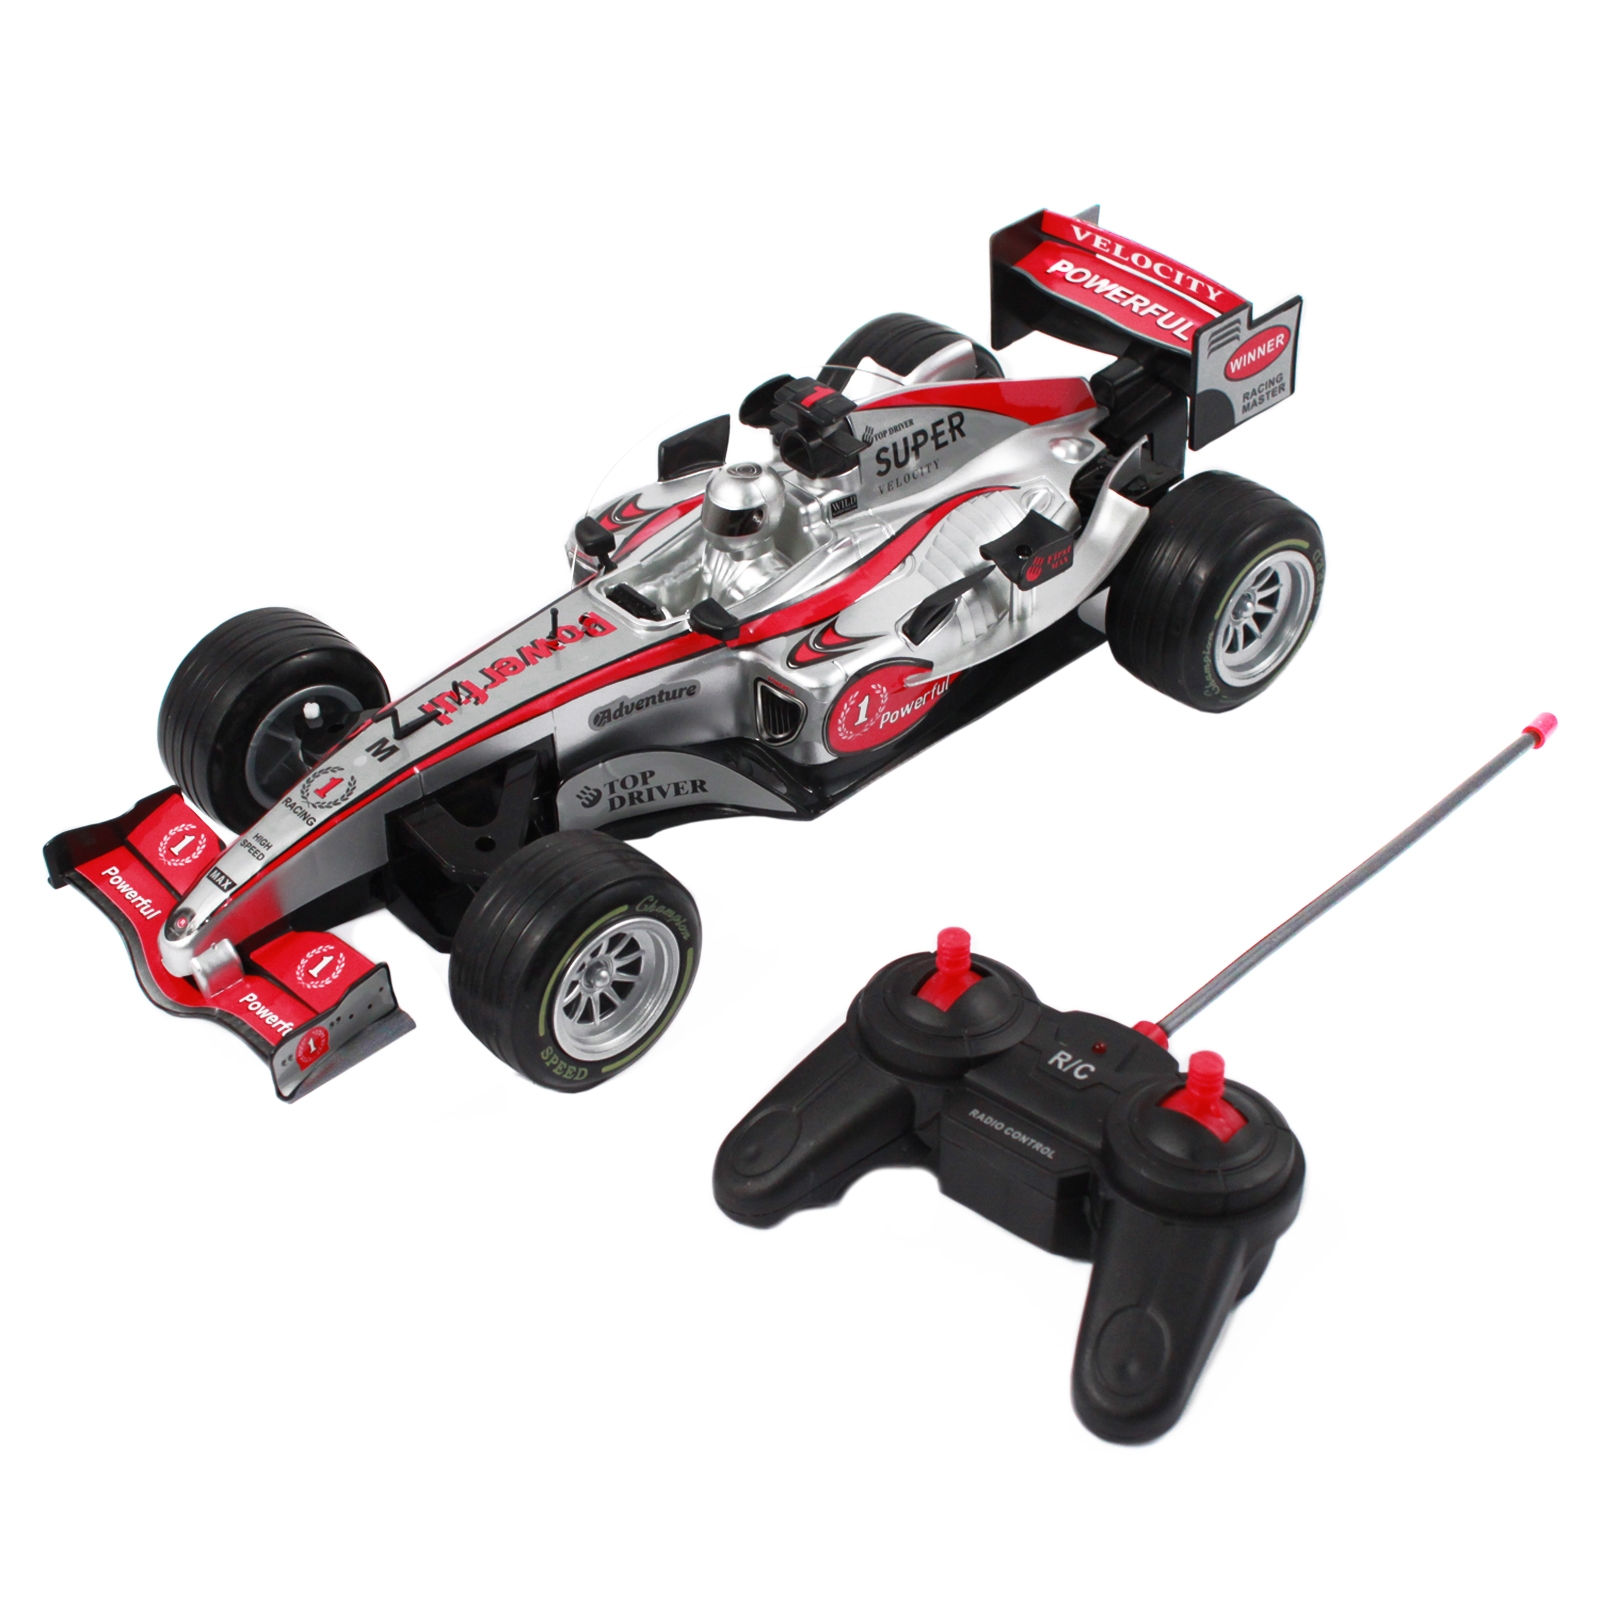 Remote Control Kids Toy Speedy Sleek Fast Race Car for Kids and Boys